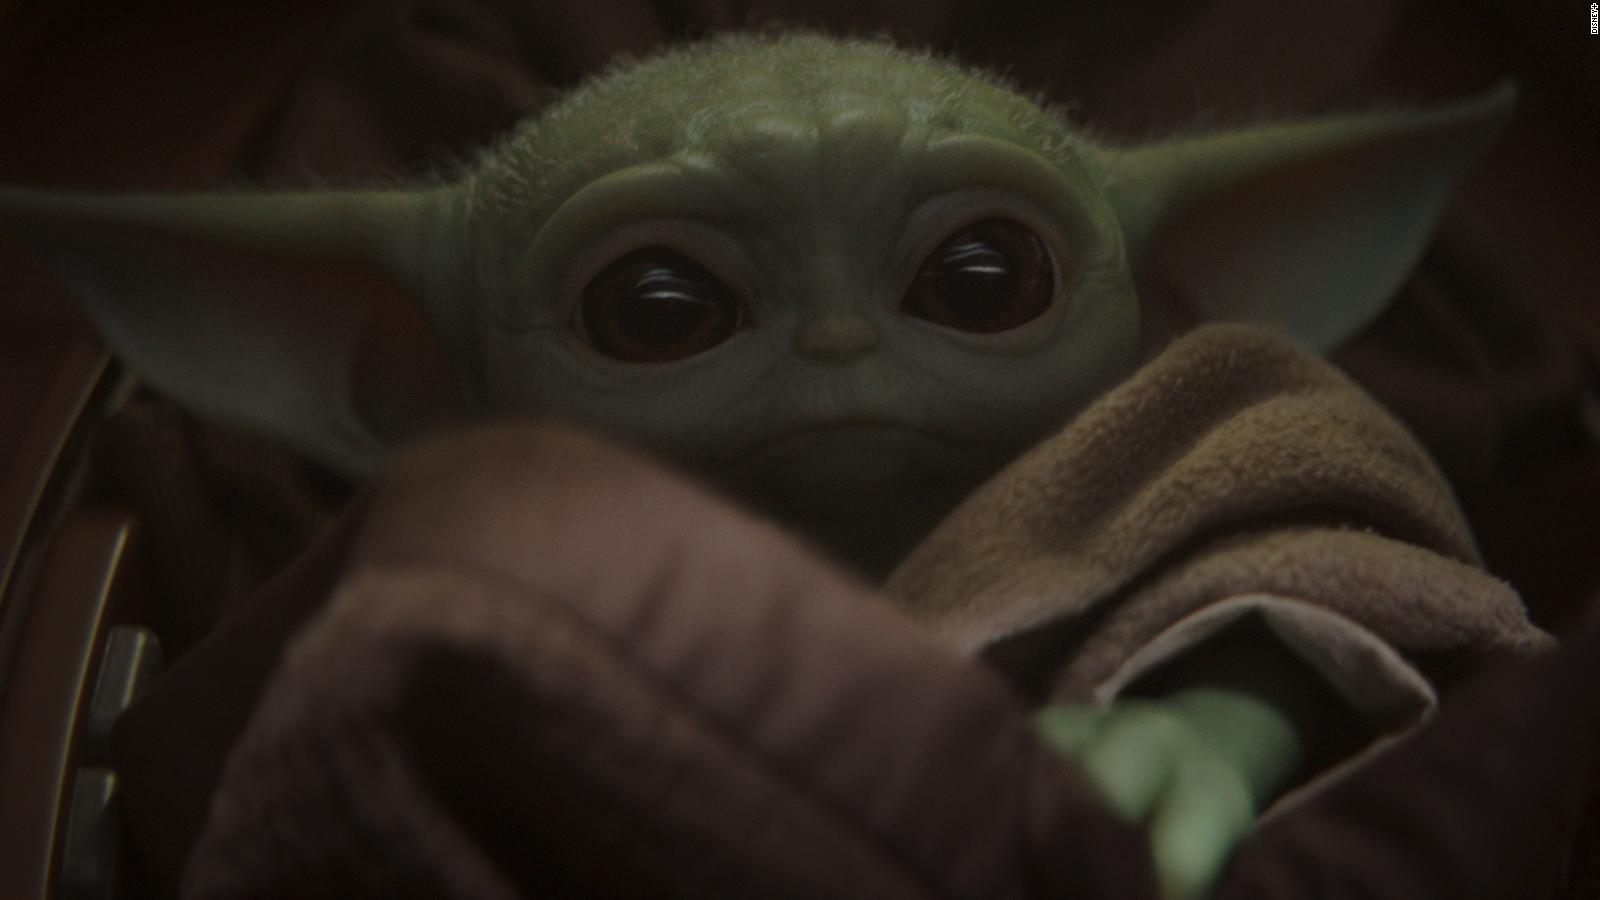 People Can T Stop Sharing Baby Yoda Memes And We Don T Want Them